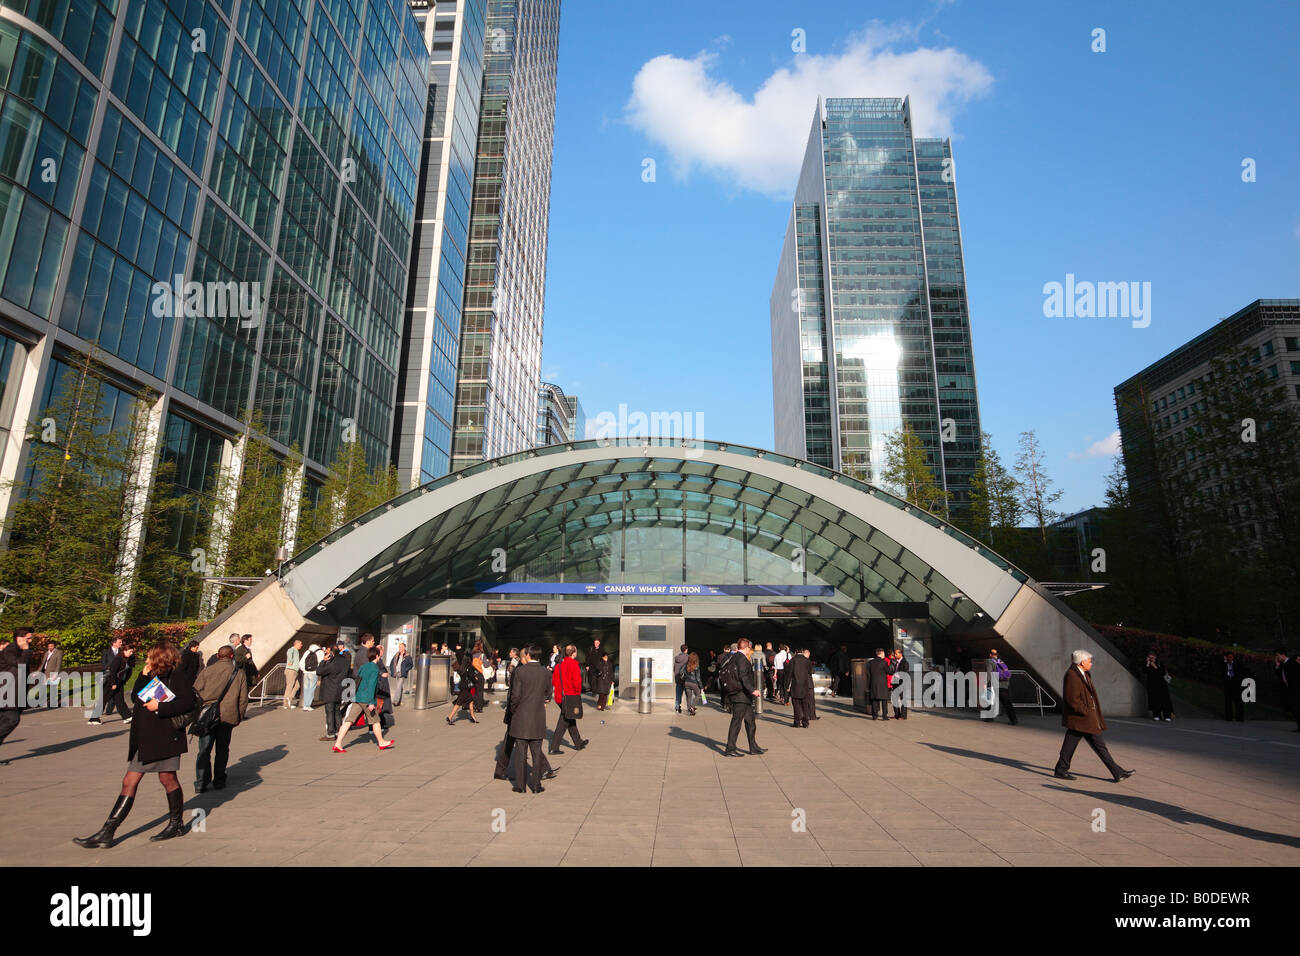 La station de Canary Wharf, Isle of Dogs, Londres. Banque D'Images